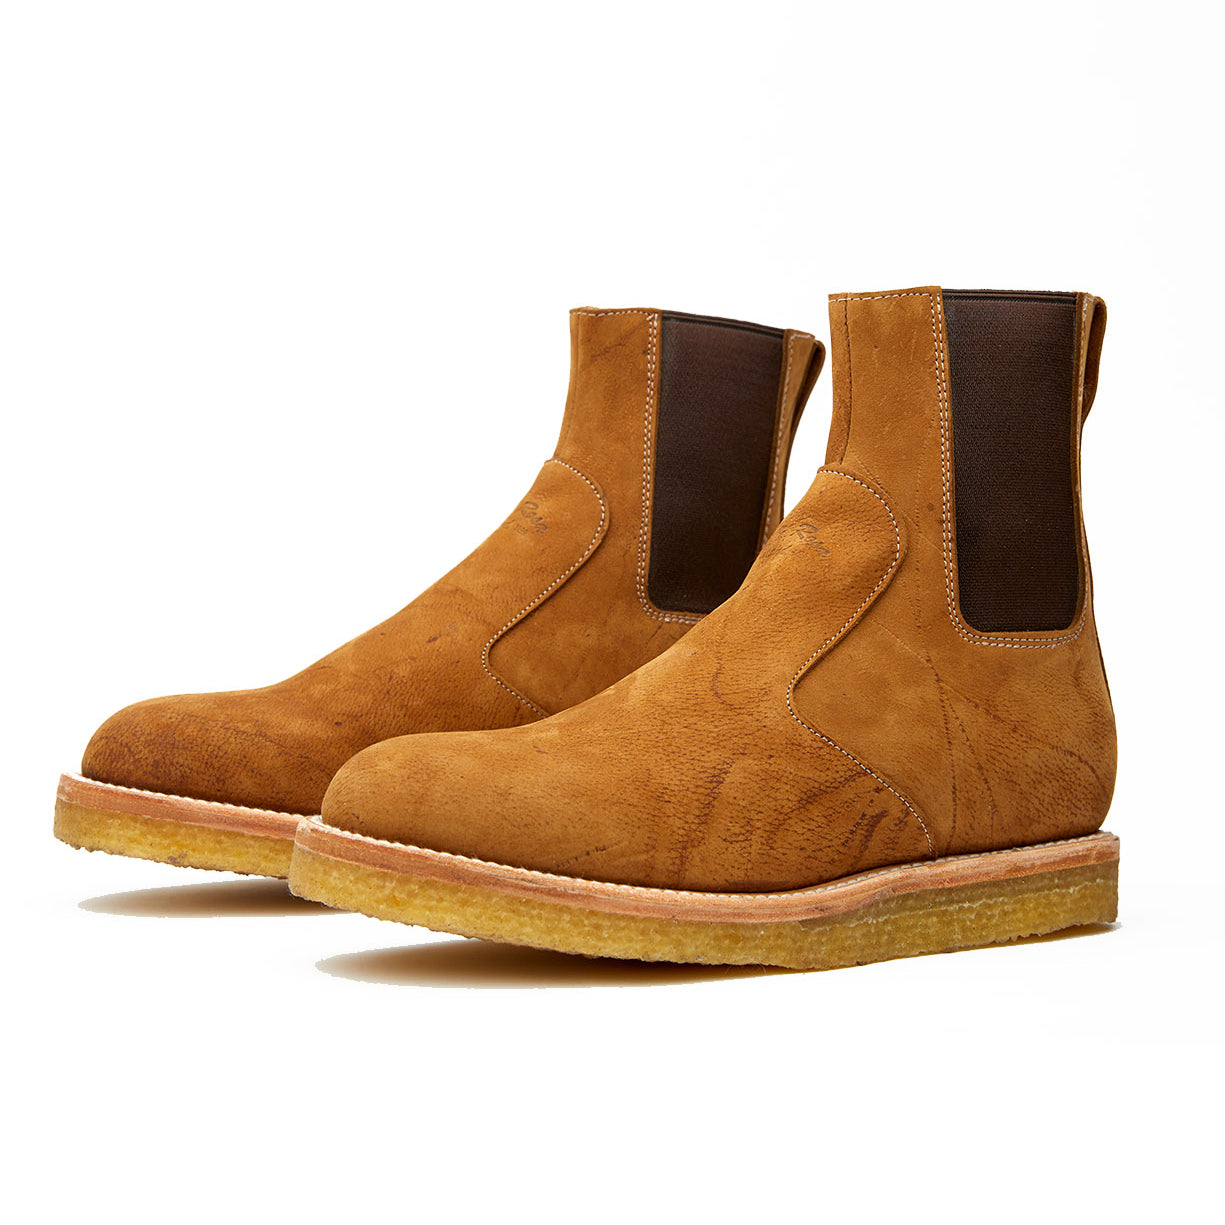 Pair of Santa Rosa Brand Stamford Boot Peanut Kudu in tan suede on a white background with a natural crepe outsole.